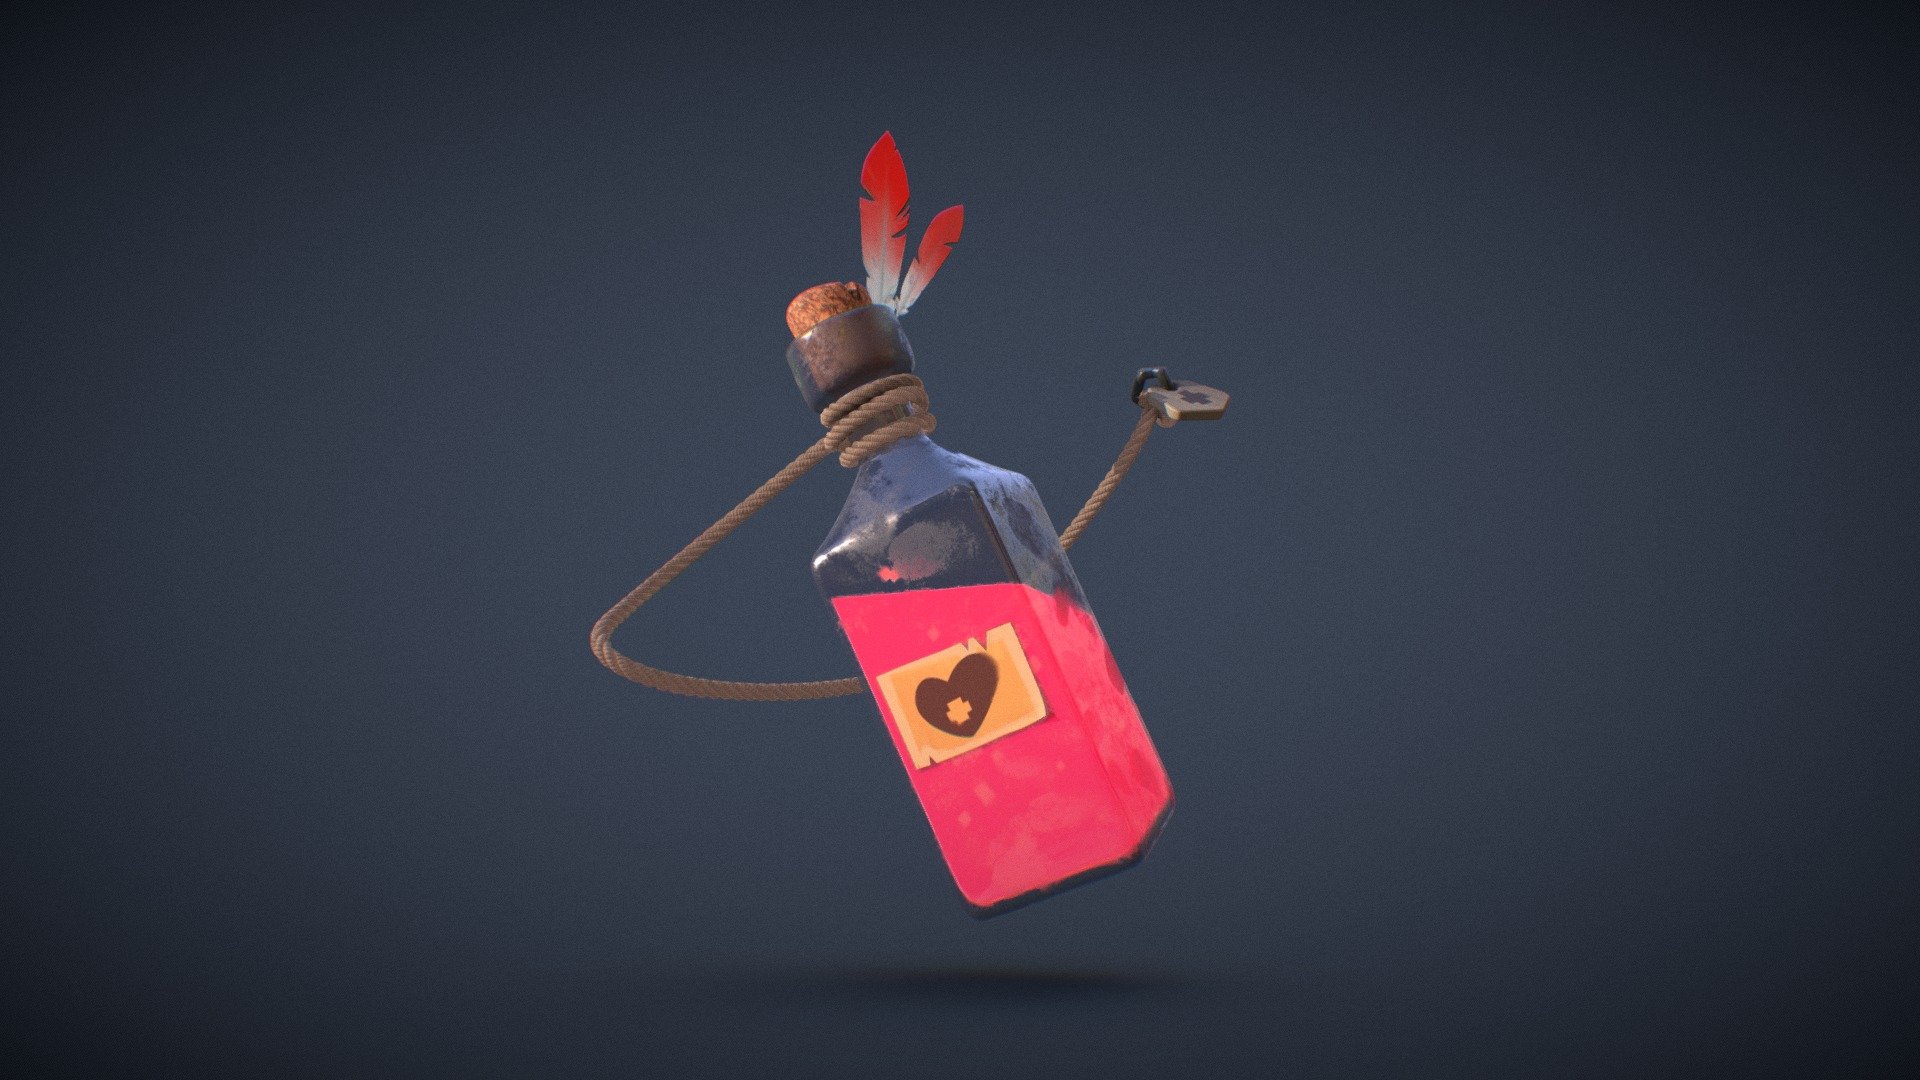 A potion that I made for a sketchfabweekly challenge. Done in Blender 3d model